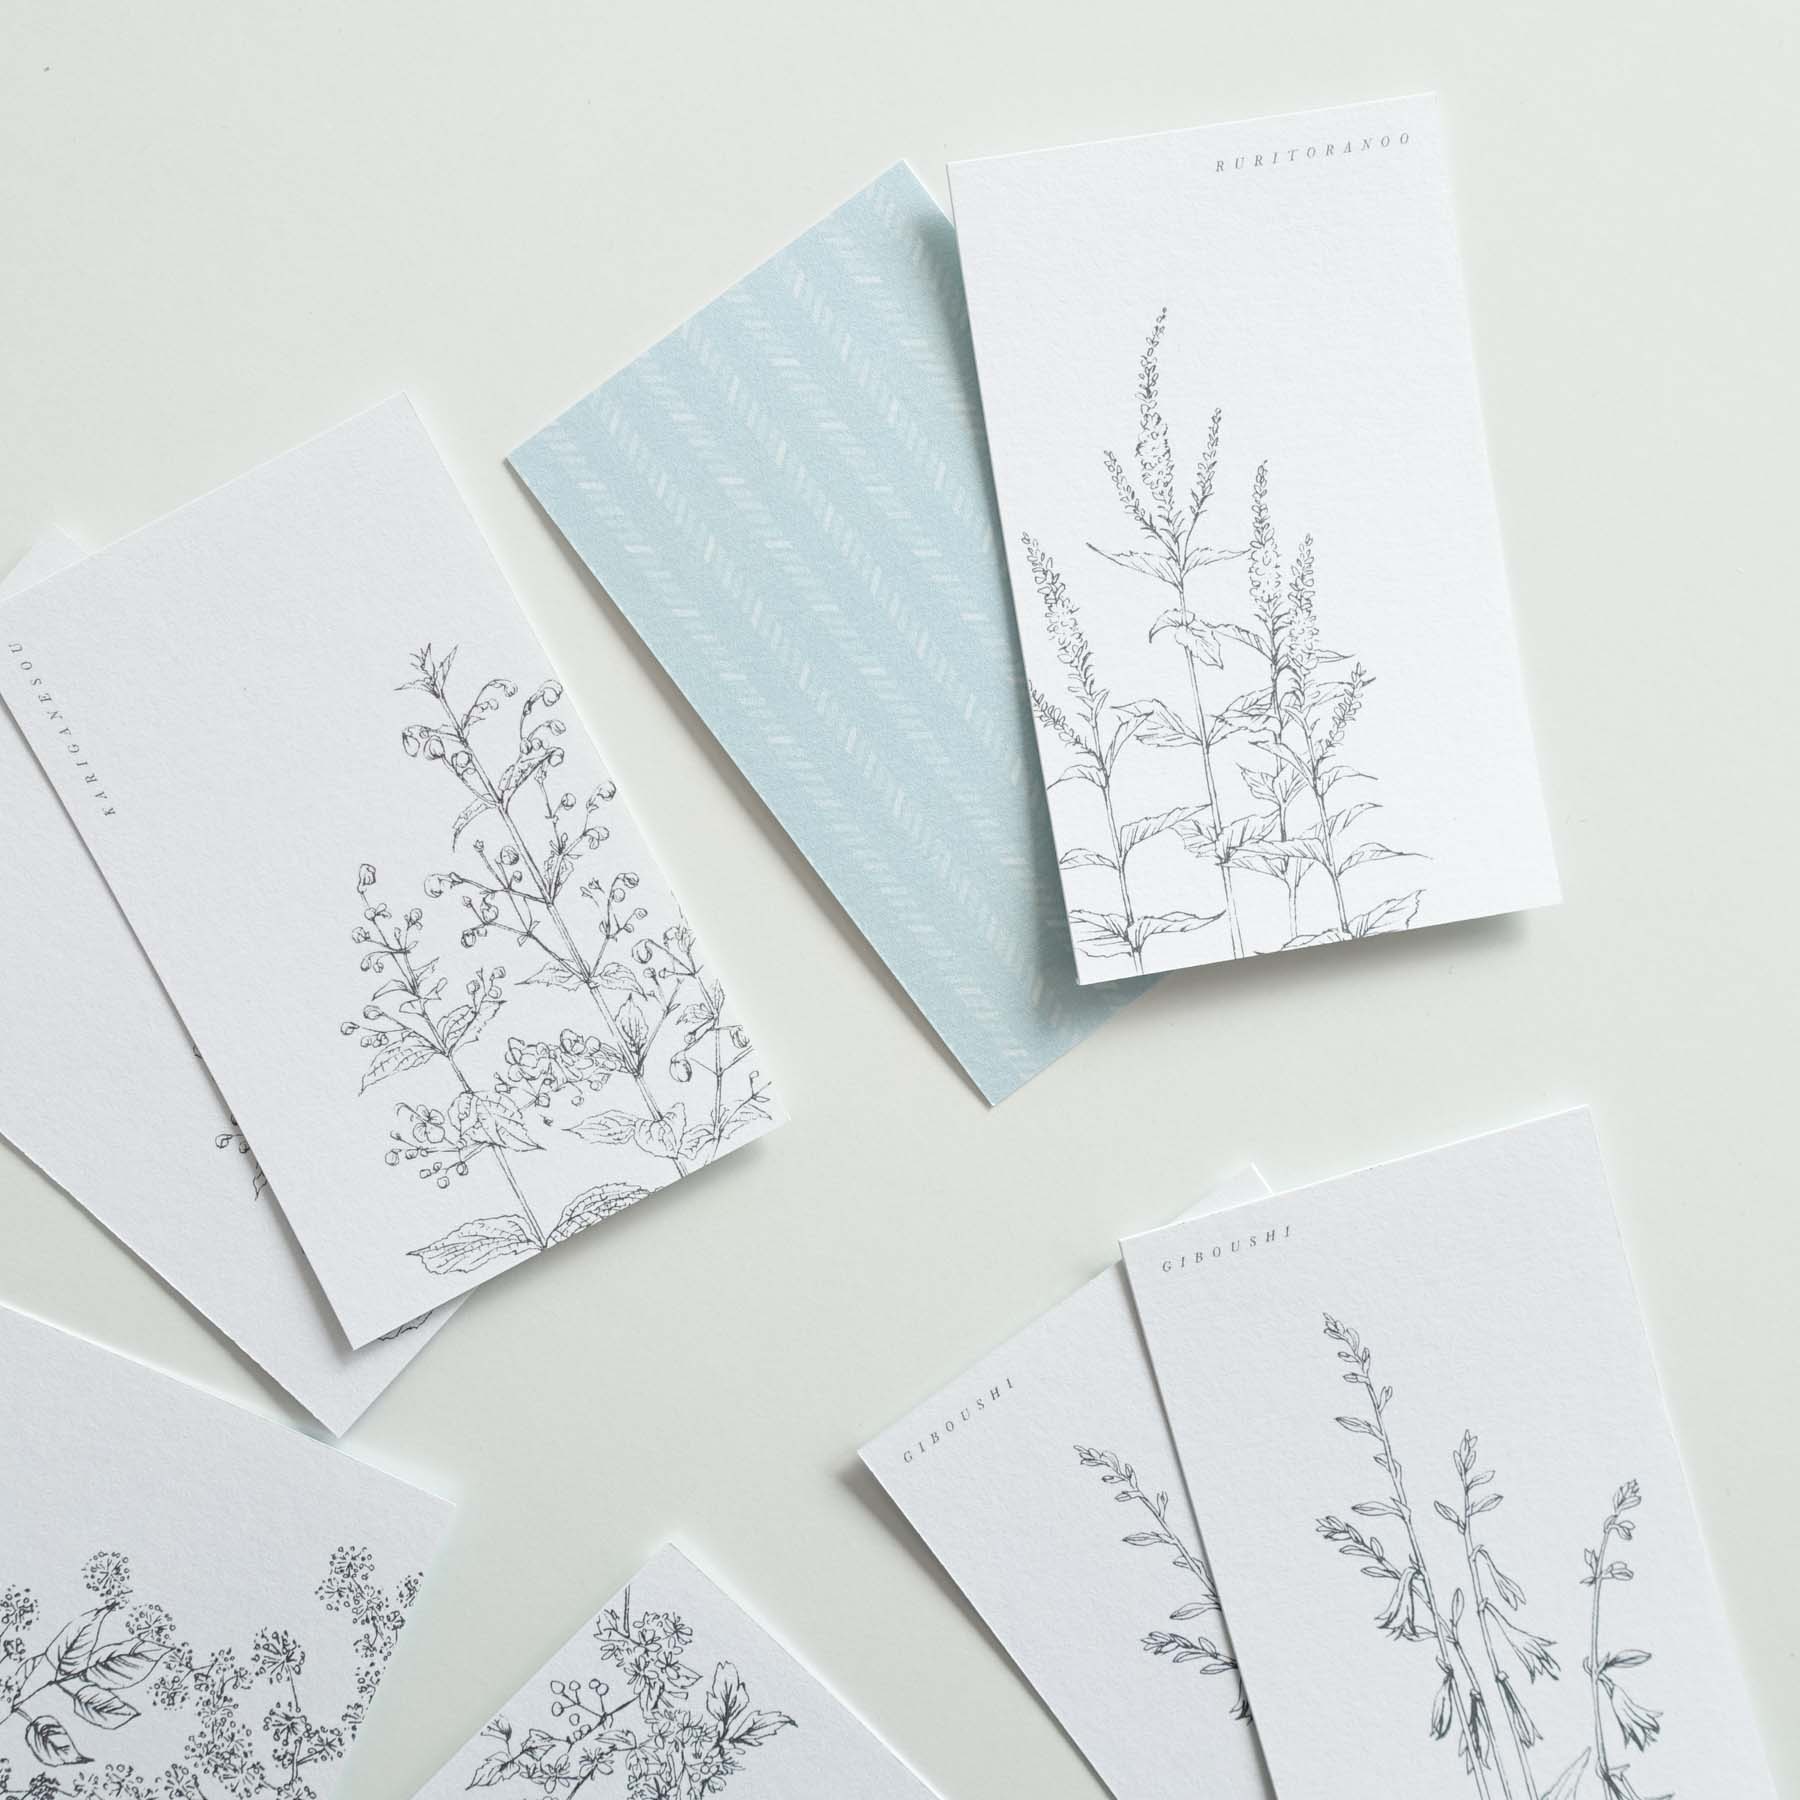 Premade business cards with floral flower drawings